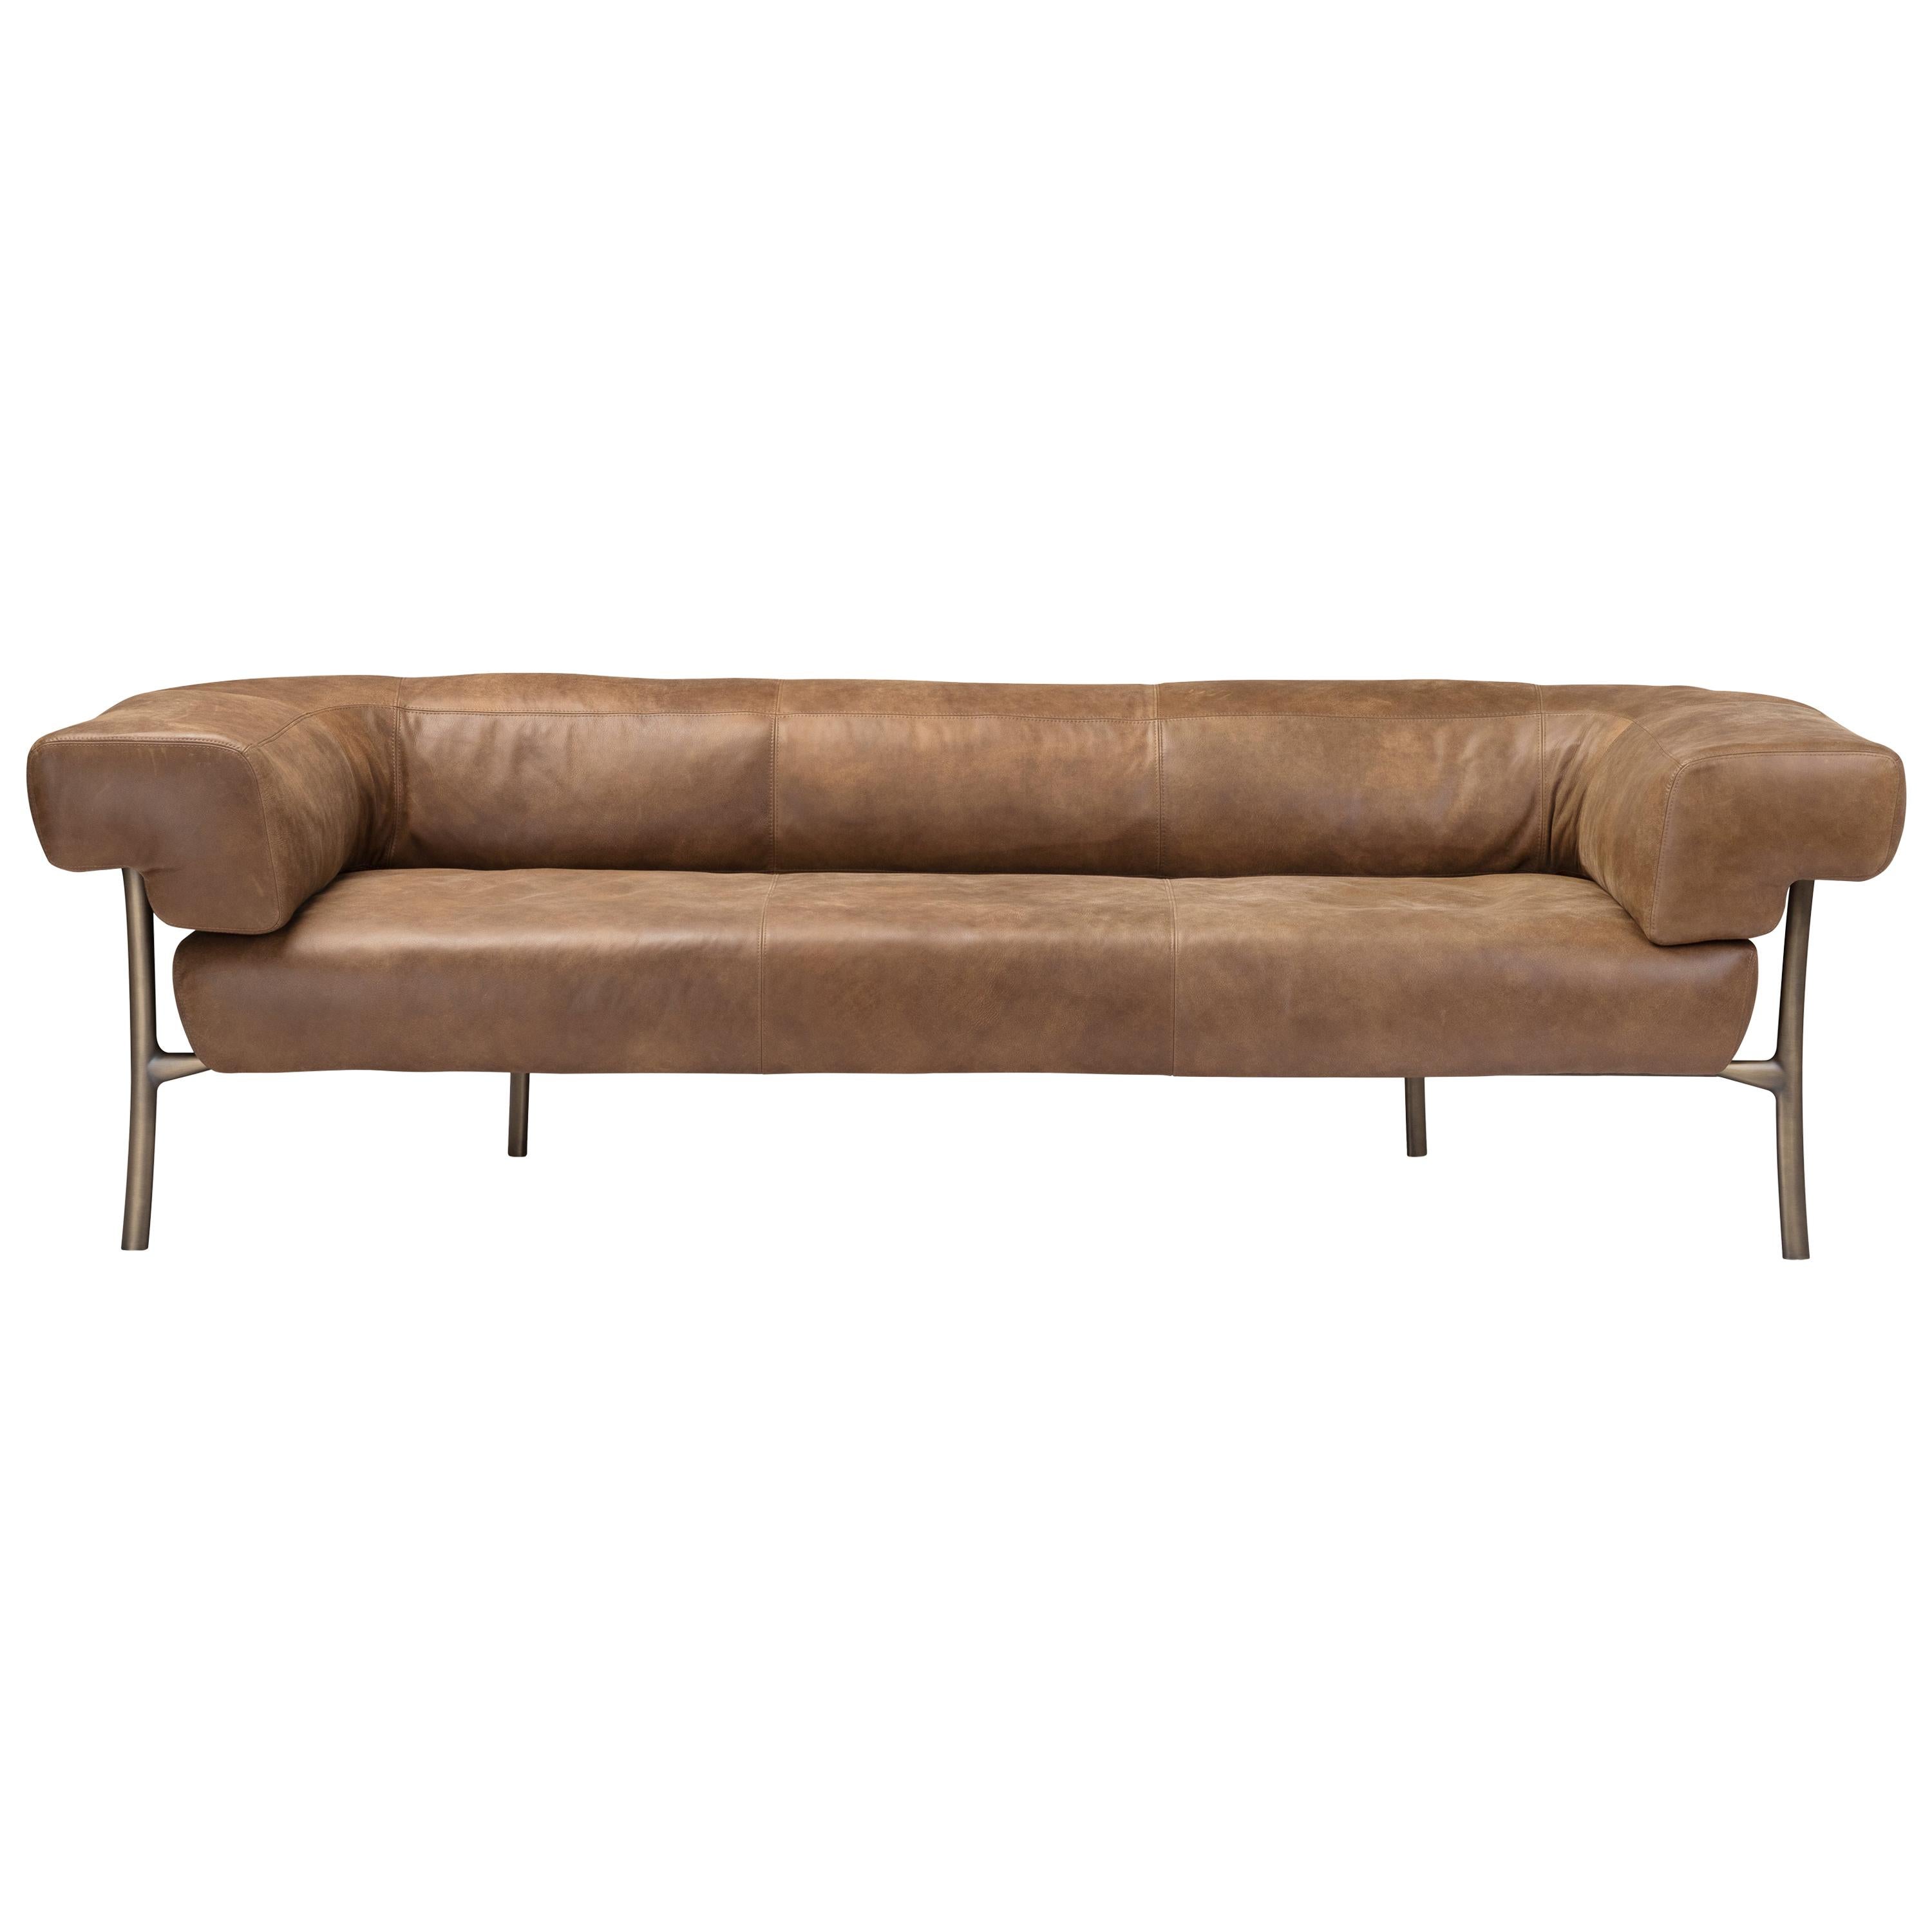 For Sale: Brown (681) Ghidini 1961 Katana 3-Seat Sofa in Natural Leather by Paolo Rizzatto